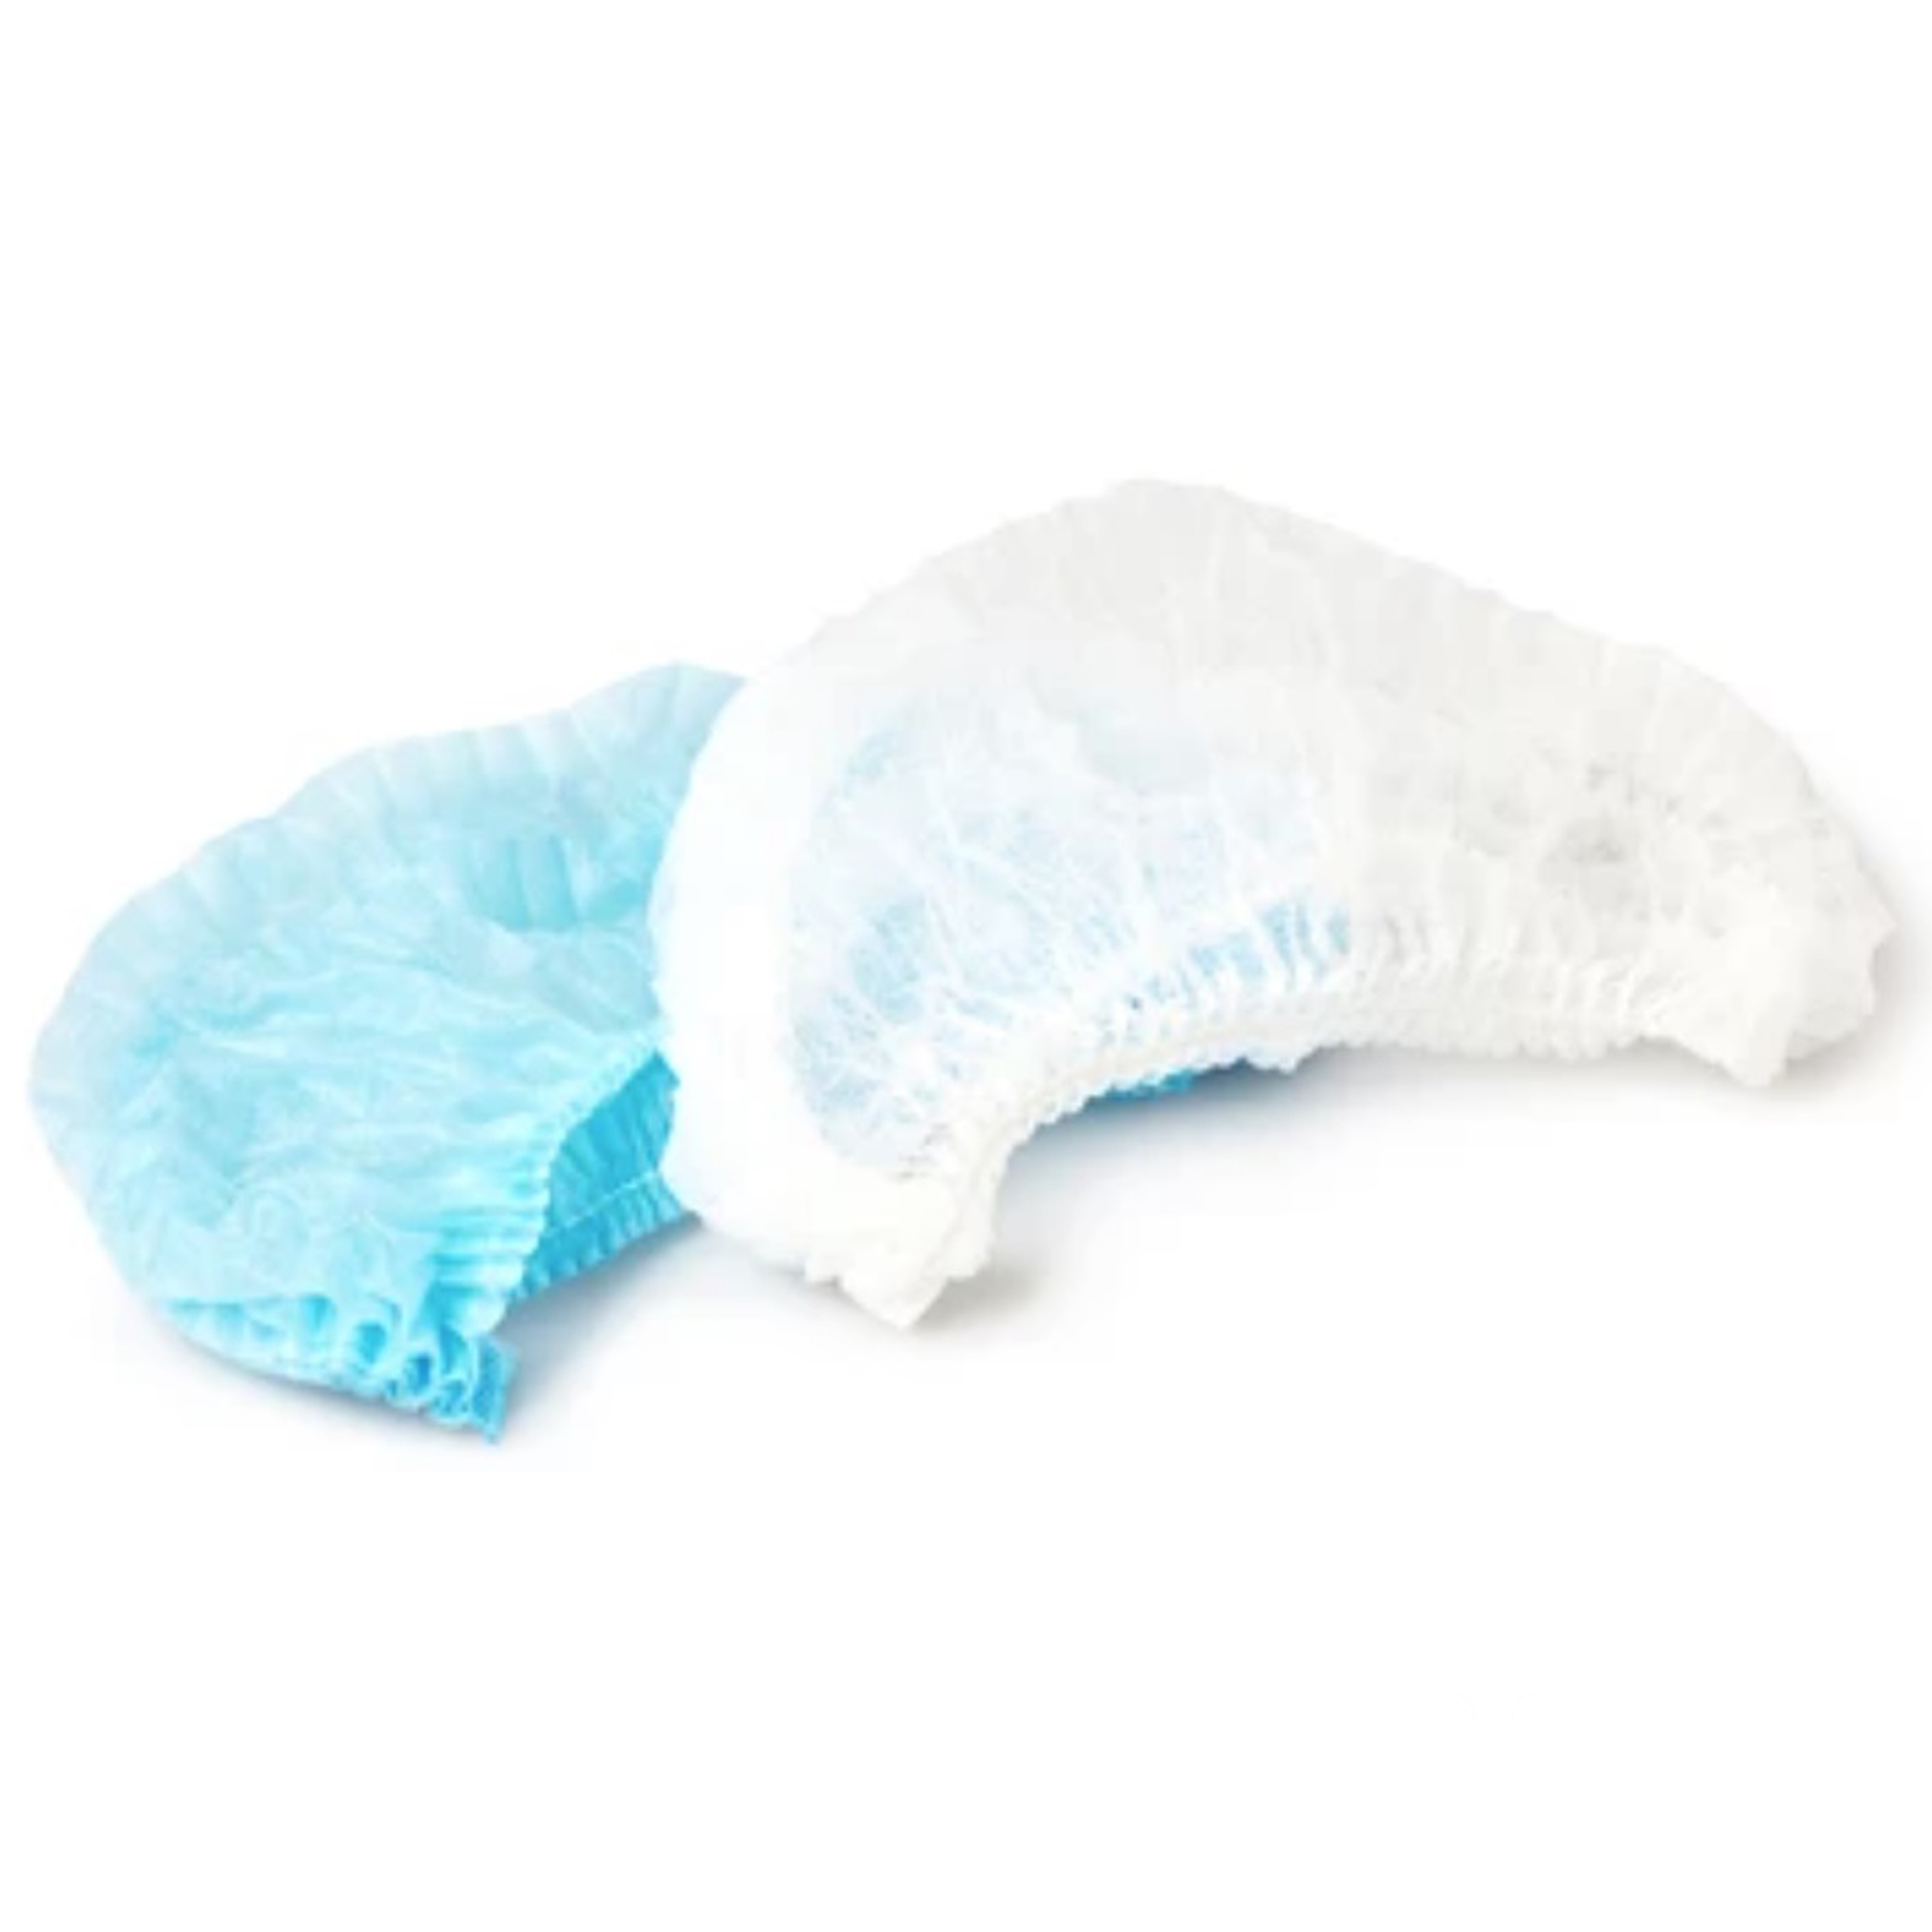 Hygiene and Safety/DISPOSABLE NONWOVEN HYGIENE SUPPLIES/Nonwoven Hygiene Caps